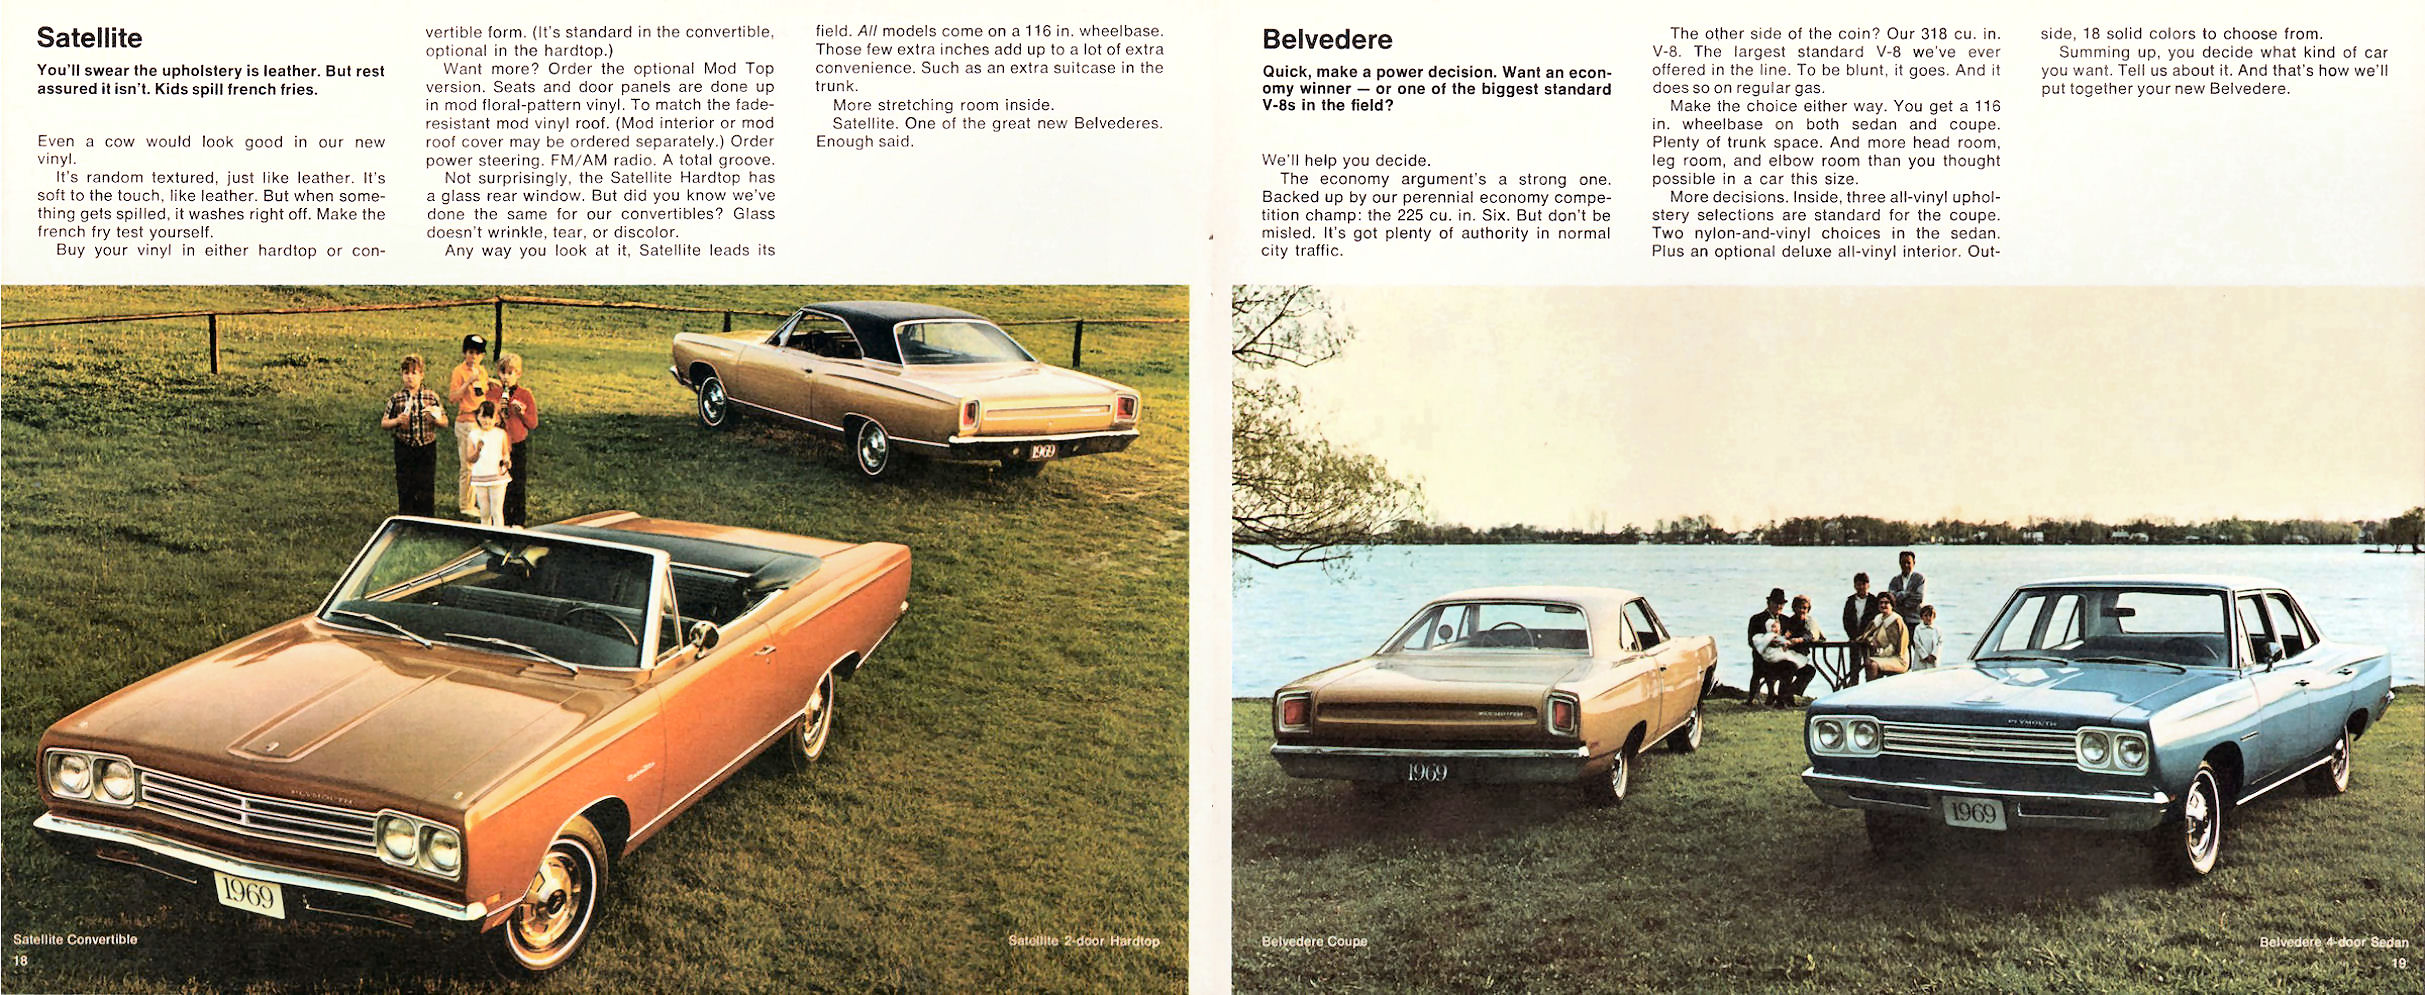 1969_Plymouth_Full_Line-18-19